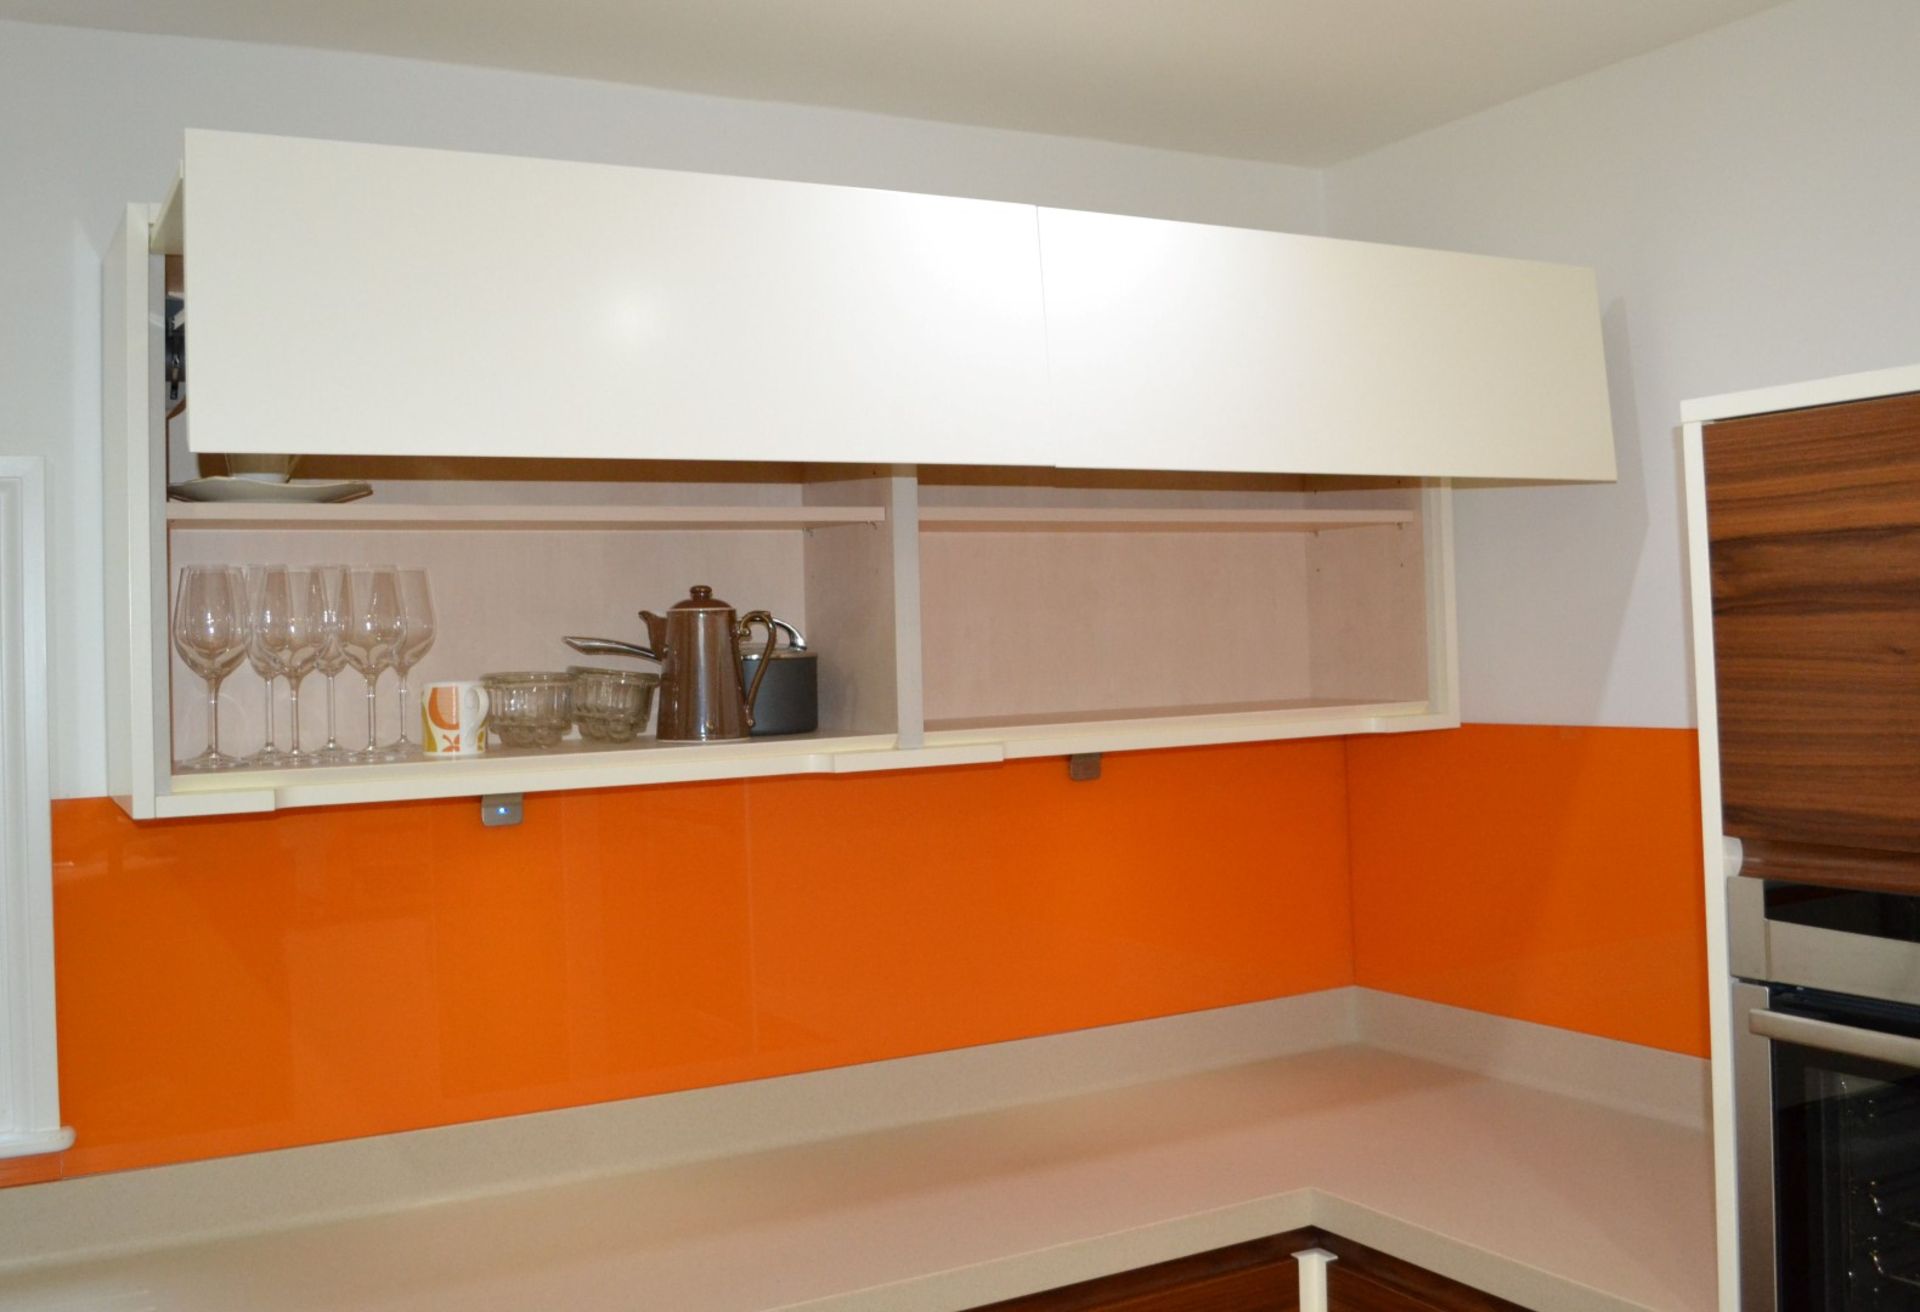 1 x Unused Bespoke Display Kitchen in Perfect Condition - Includes Unused Neff and Fisher & Paykel - Image 32 of 60